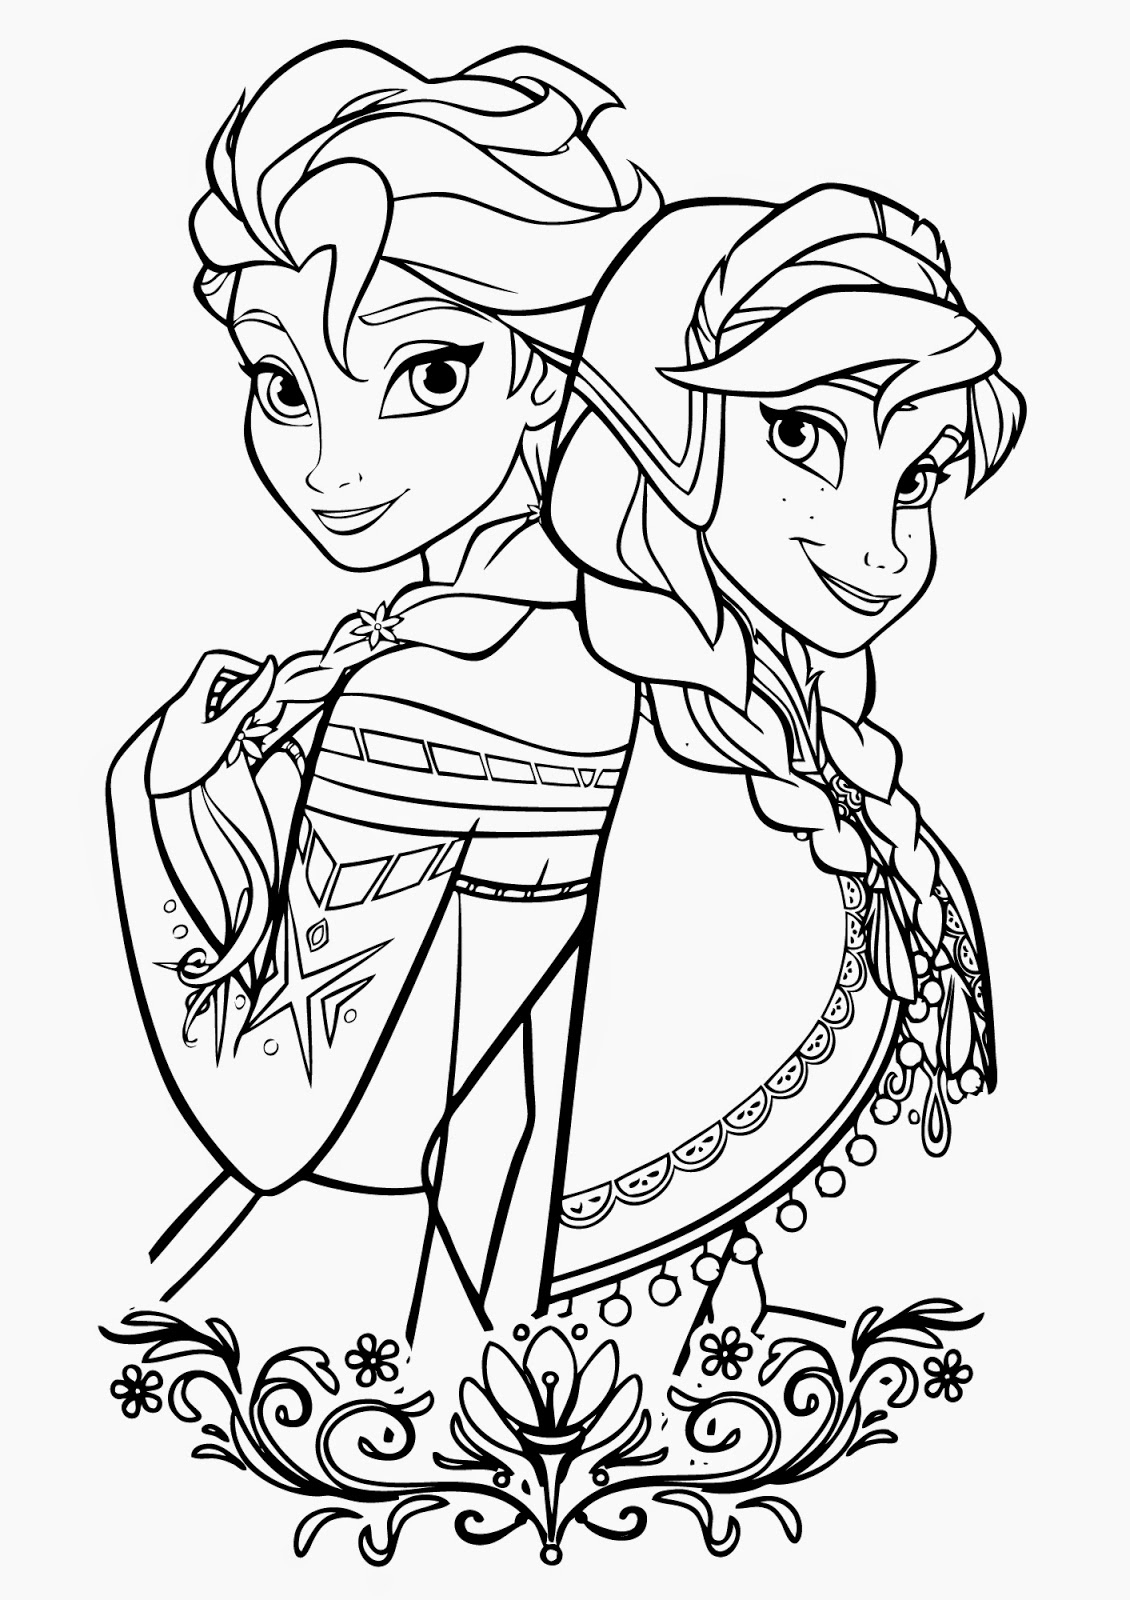 Disney Characters Printable Coloring Pages at GetDrawings | Free download